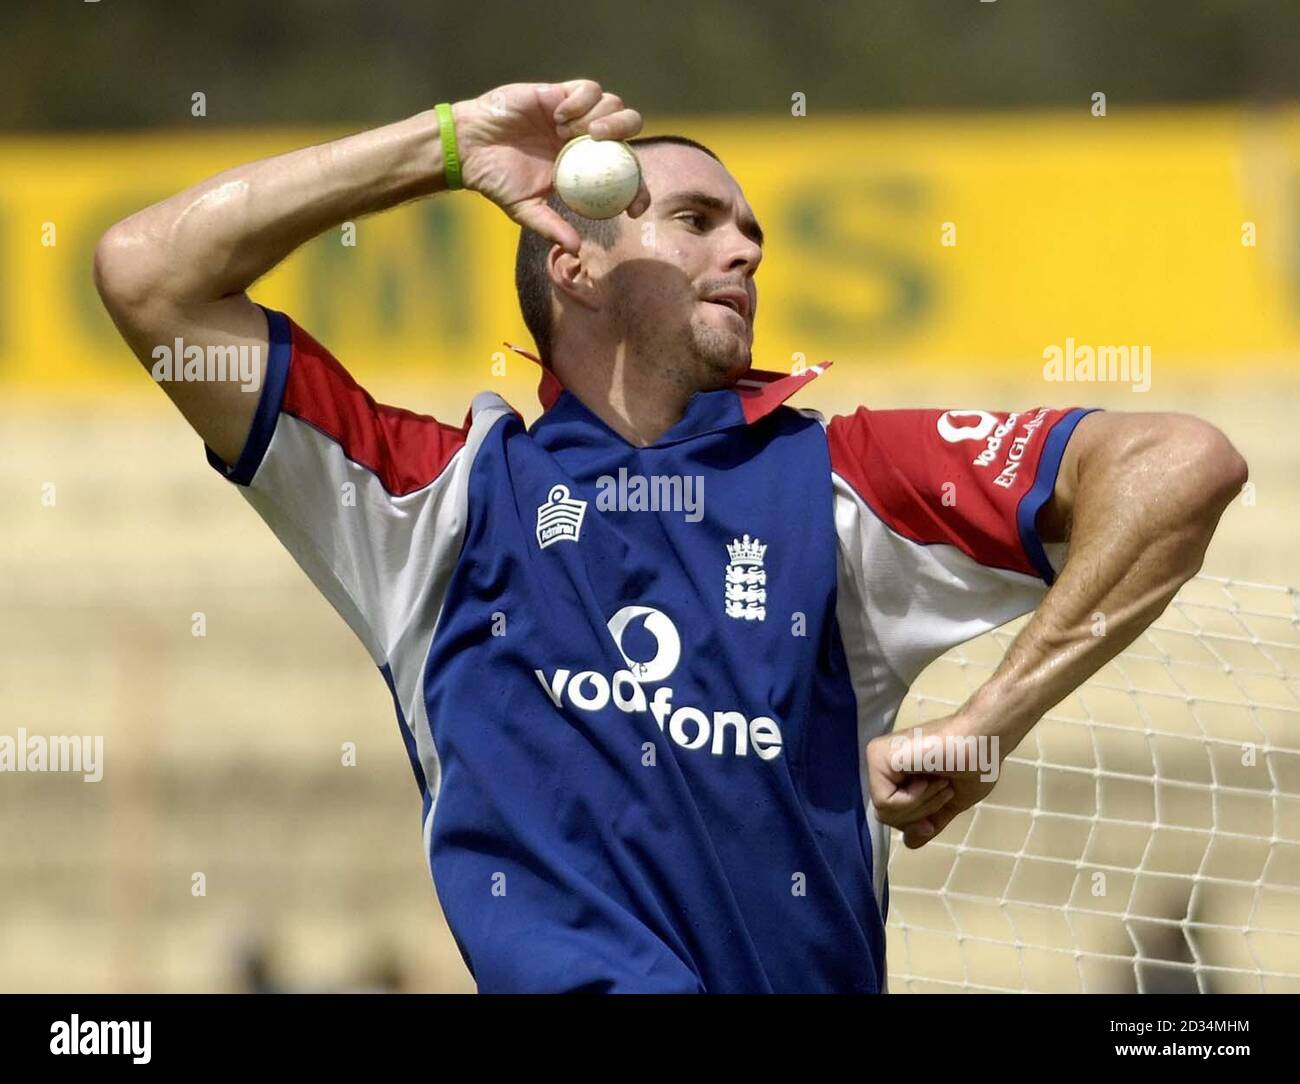 England's Kevin Pietersen bowls in the nets at the Keenan Stadium, Jamshedpur, India. Stock Photo